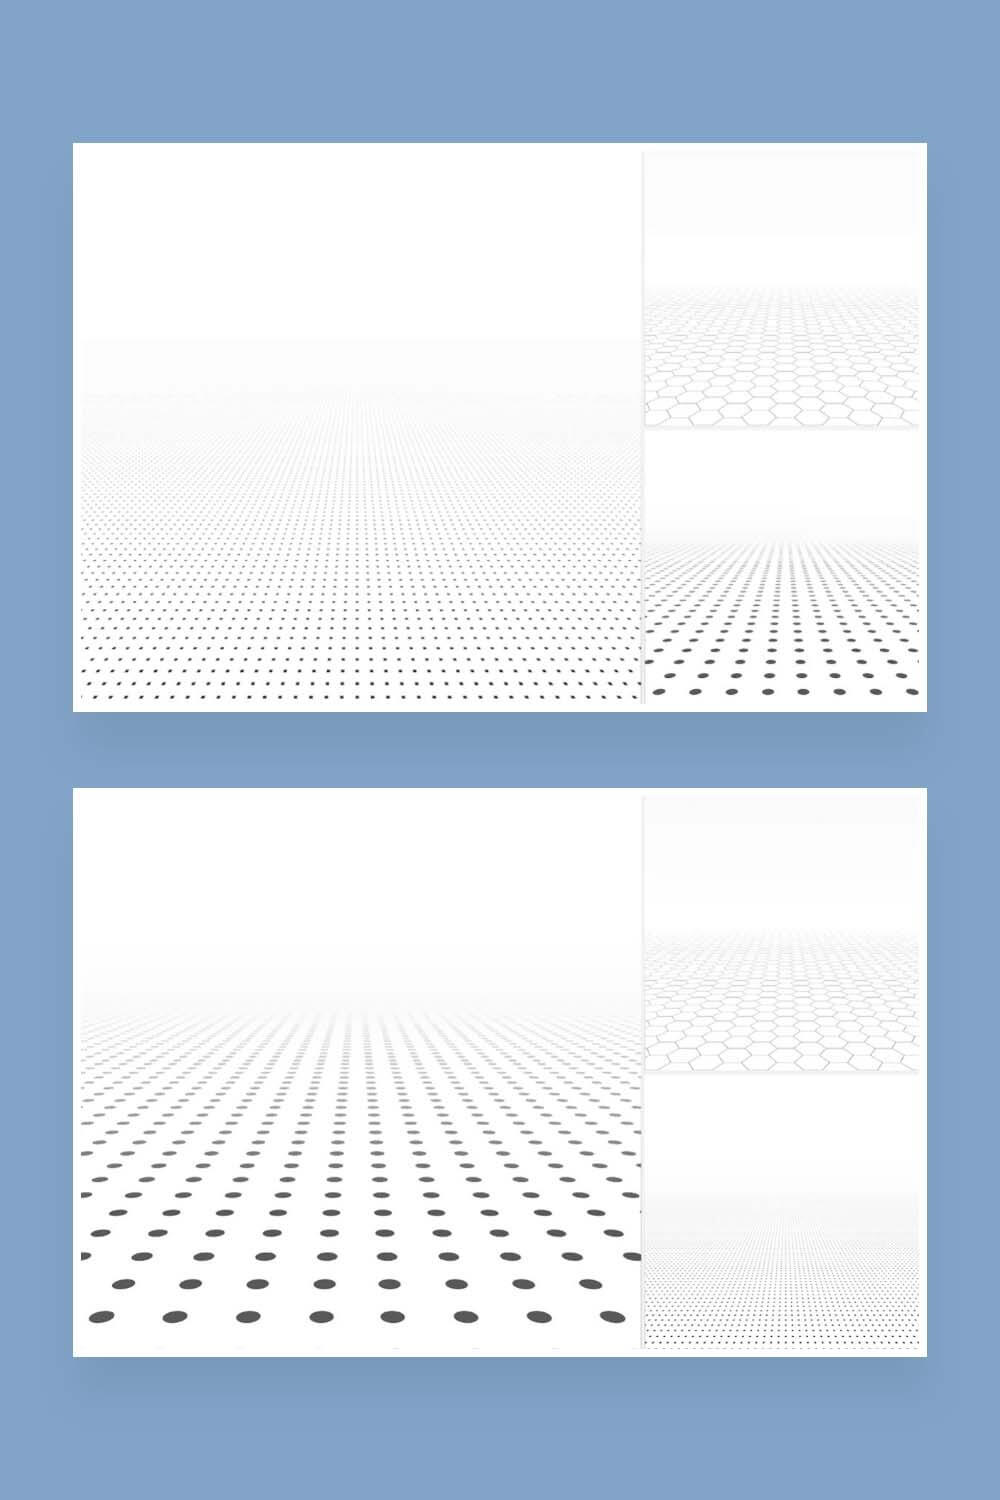 Three patterns on two pictures of an abstract background with a white texture perspective.